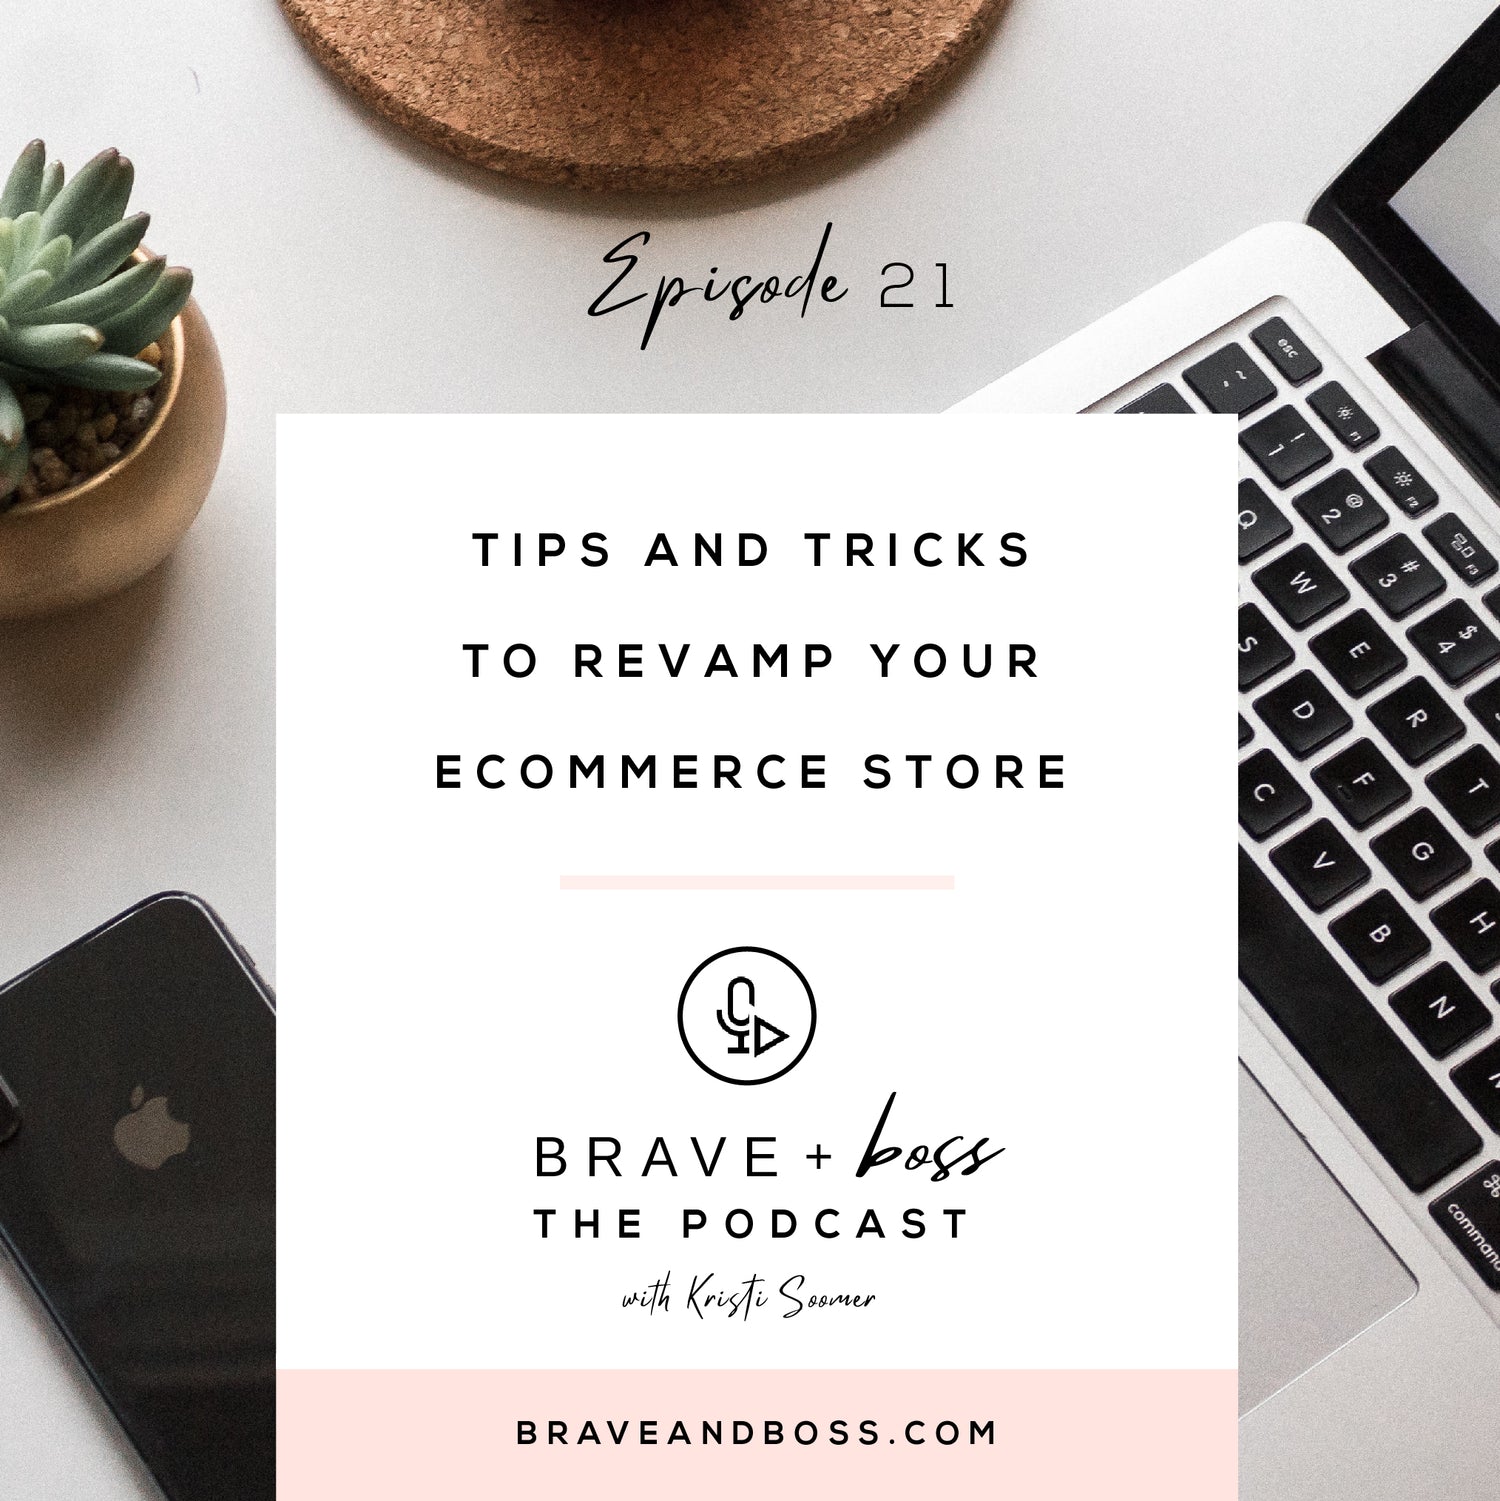 Tips and Tricks to Revamp your eCommerce Store